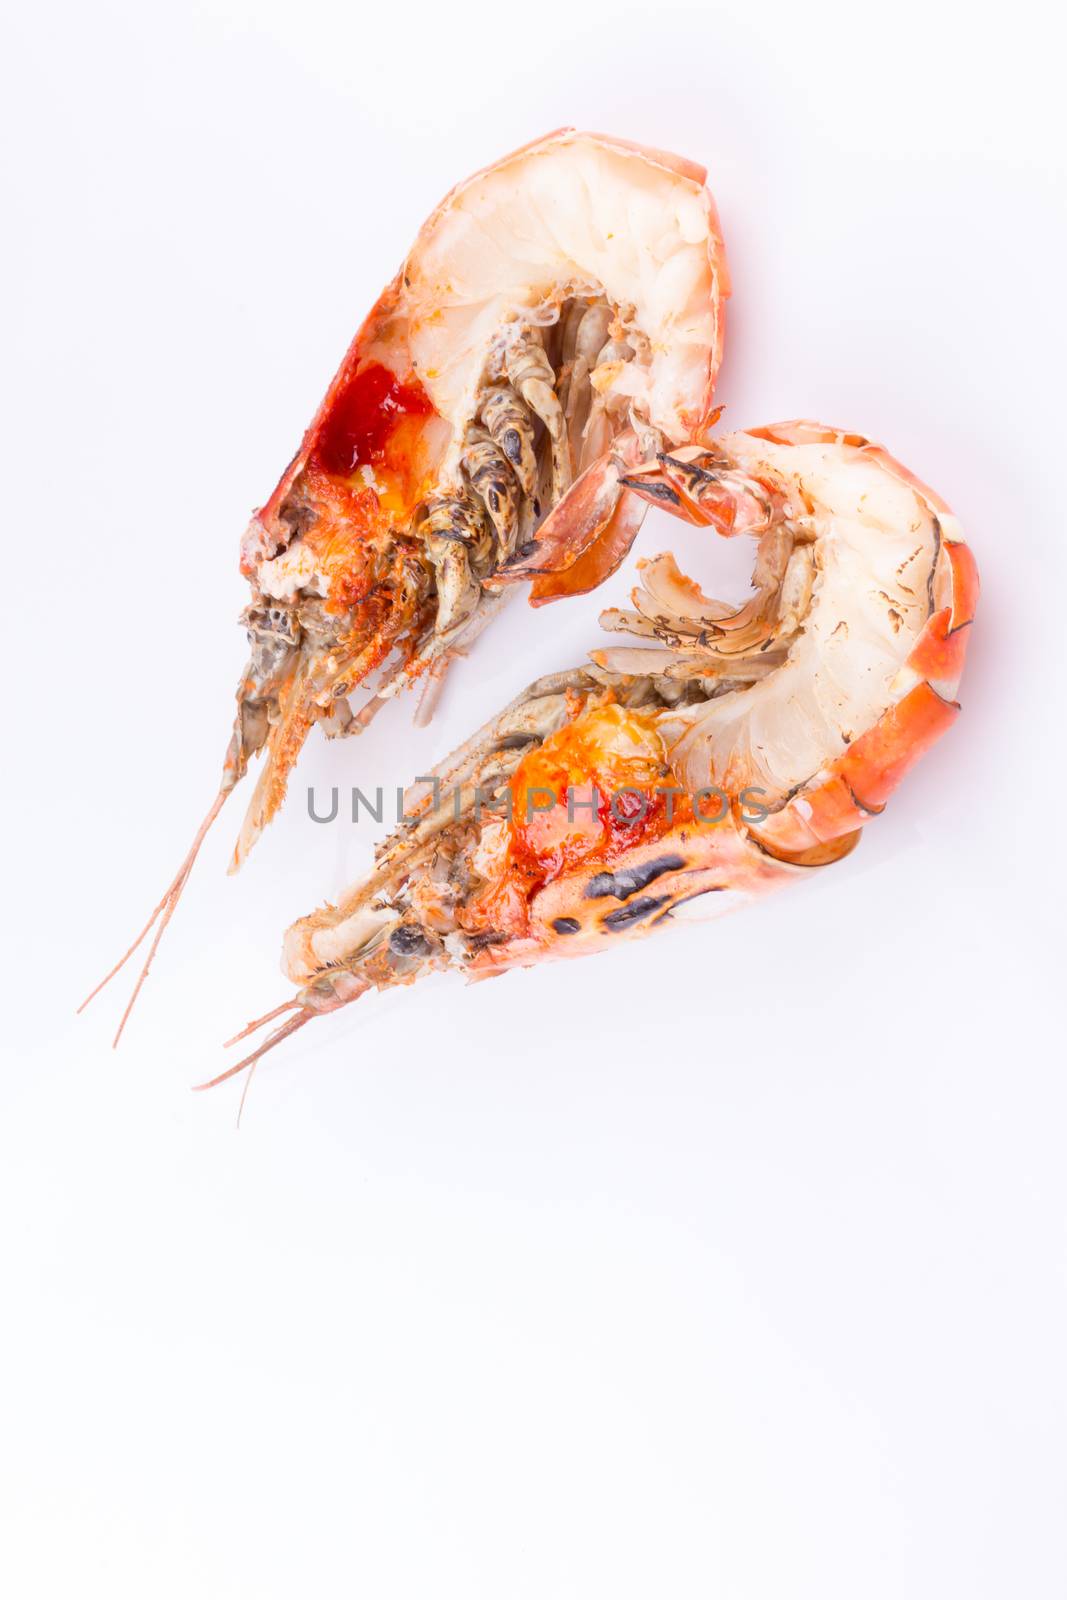 grilled giant river prawn with yellow creamy fat on head on a wh by kaiskynet